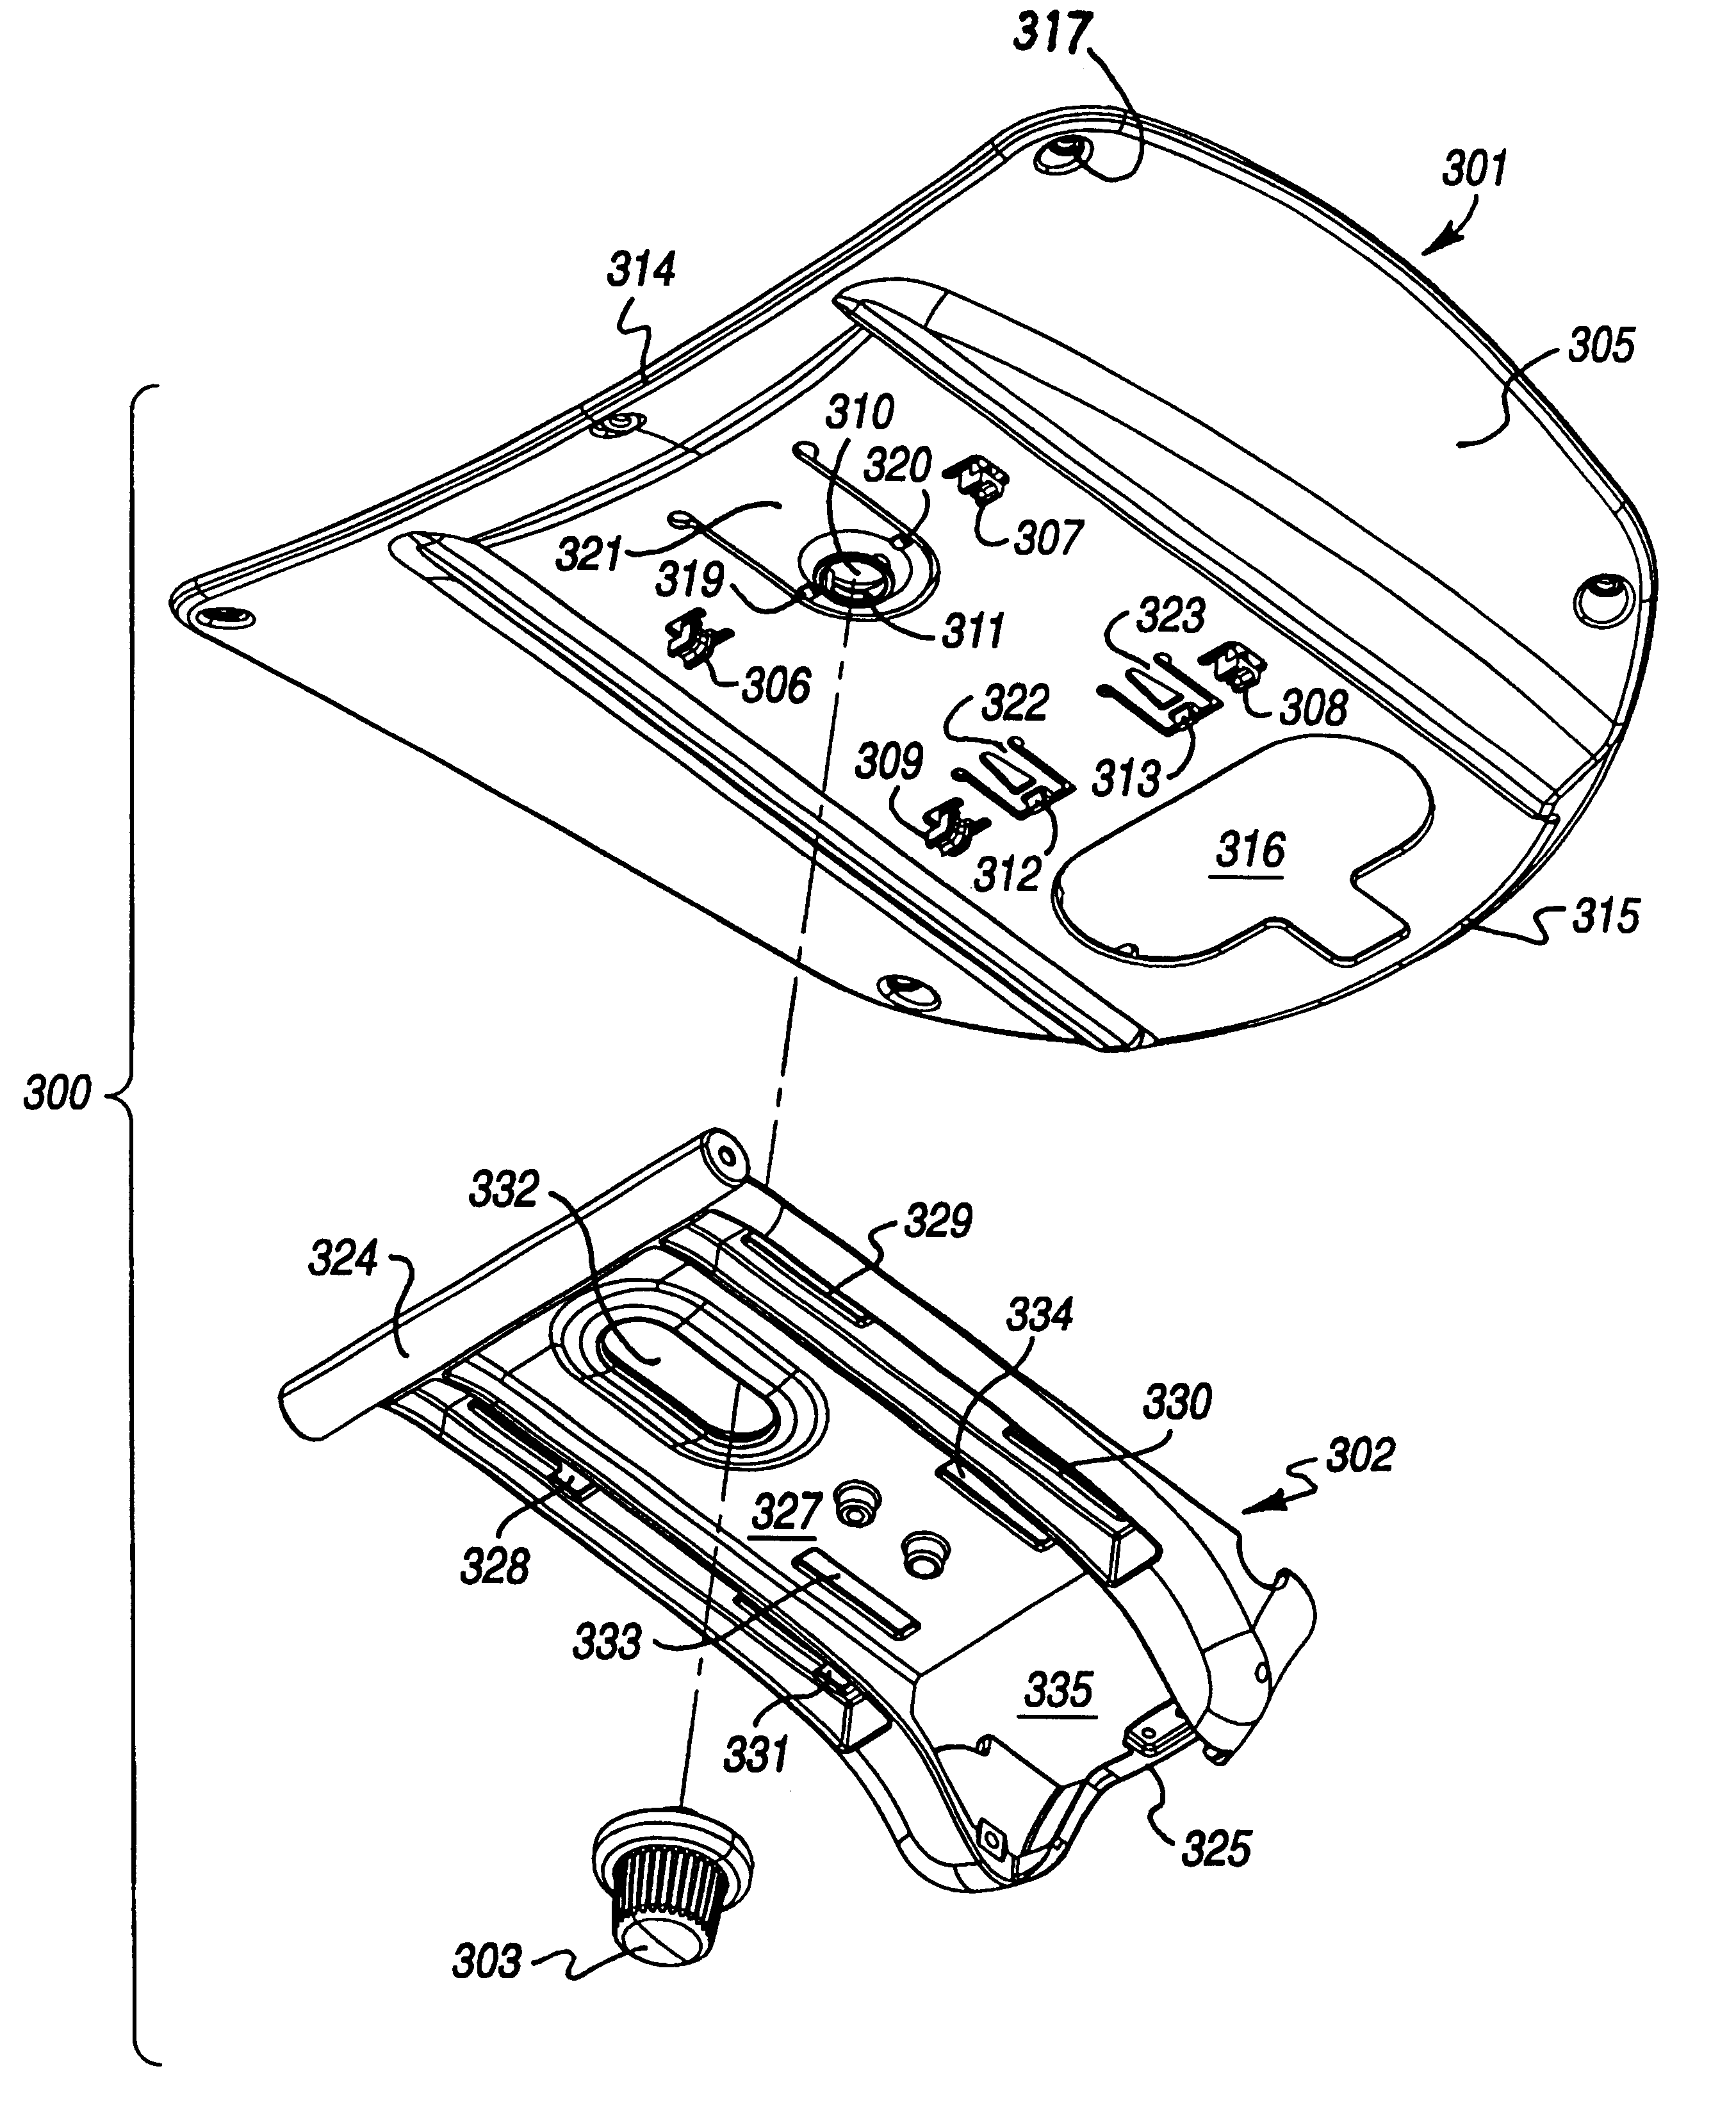 Adjustable chair seat with locking mechanism